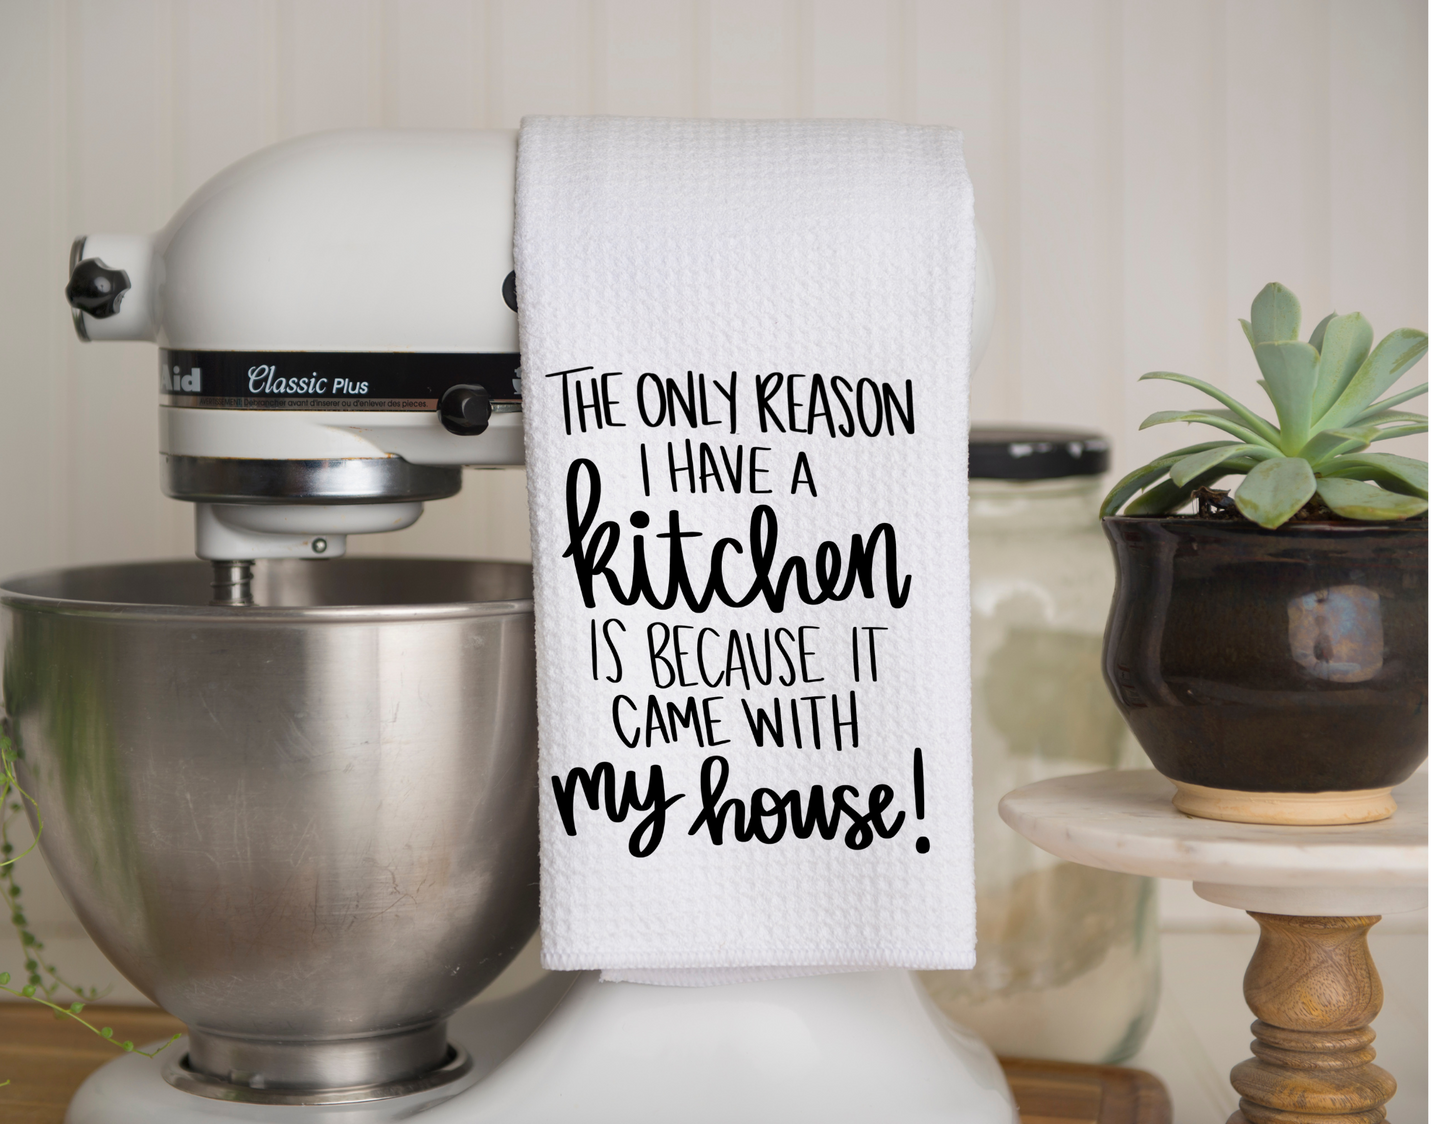 The Only Reason I Have a Kitchen Towel